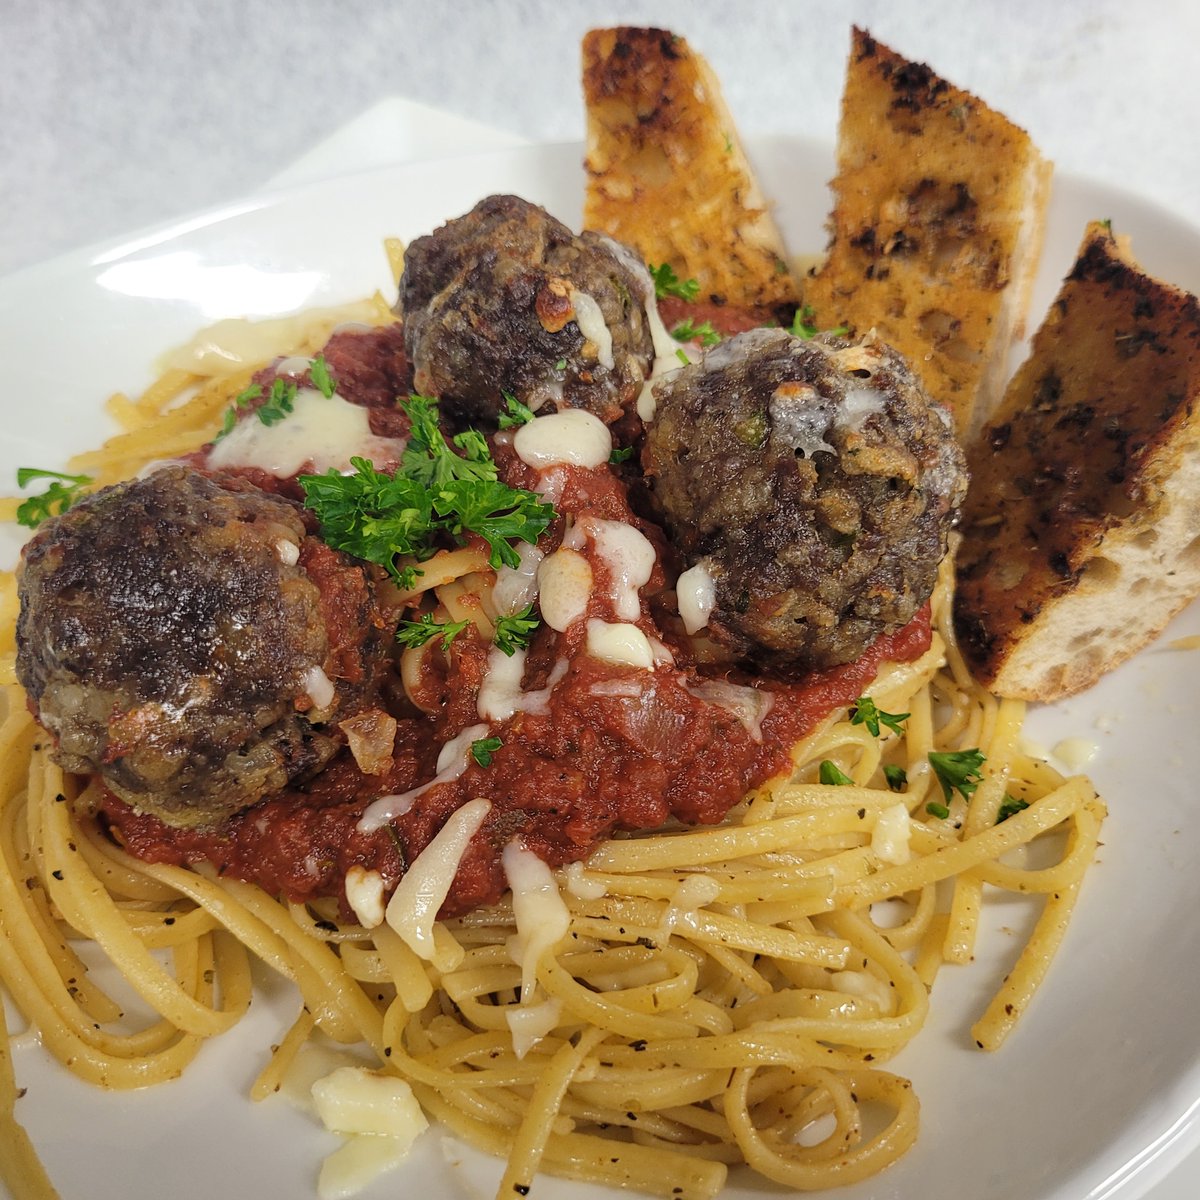 Our daily specials includes Spaghetti & Meatball Mondays😋 😎 Enjoy a plate of spaghetti with our house made marinara, meatballs and garlic toast for just $12! Bring the whole family!! #thesummitkitchen #spokanewa #spokanegram #spokaneeats  #spokanedoesntsuck